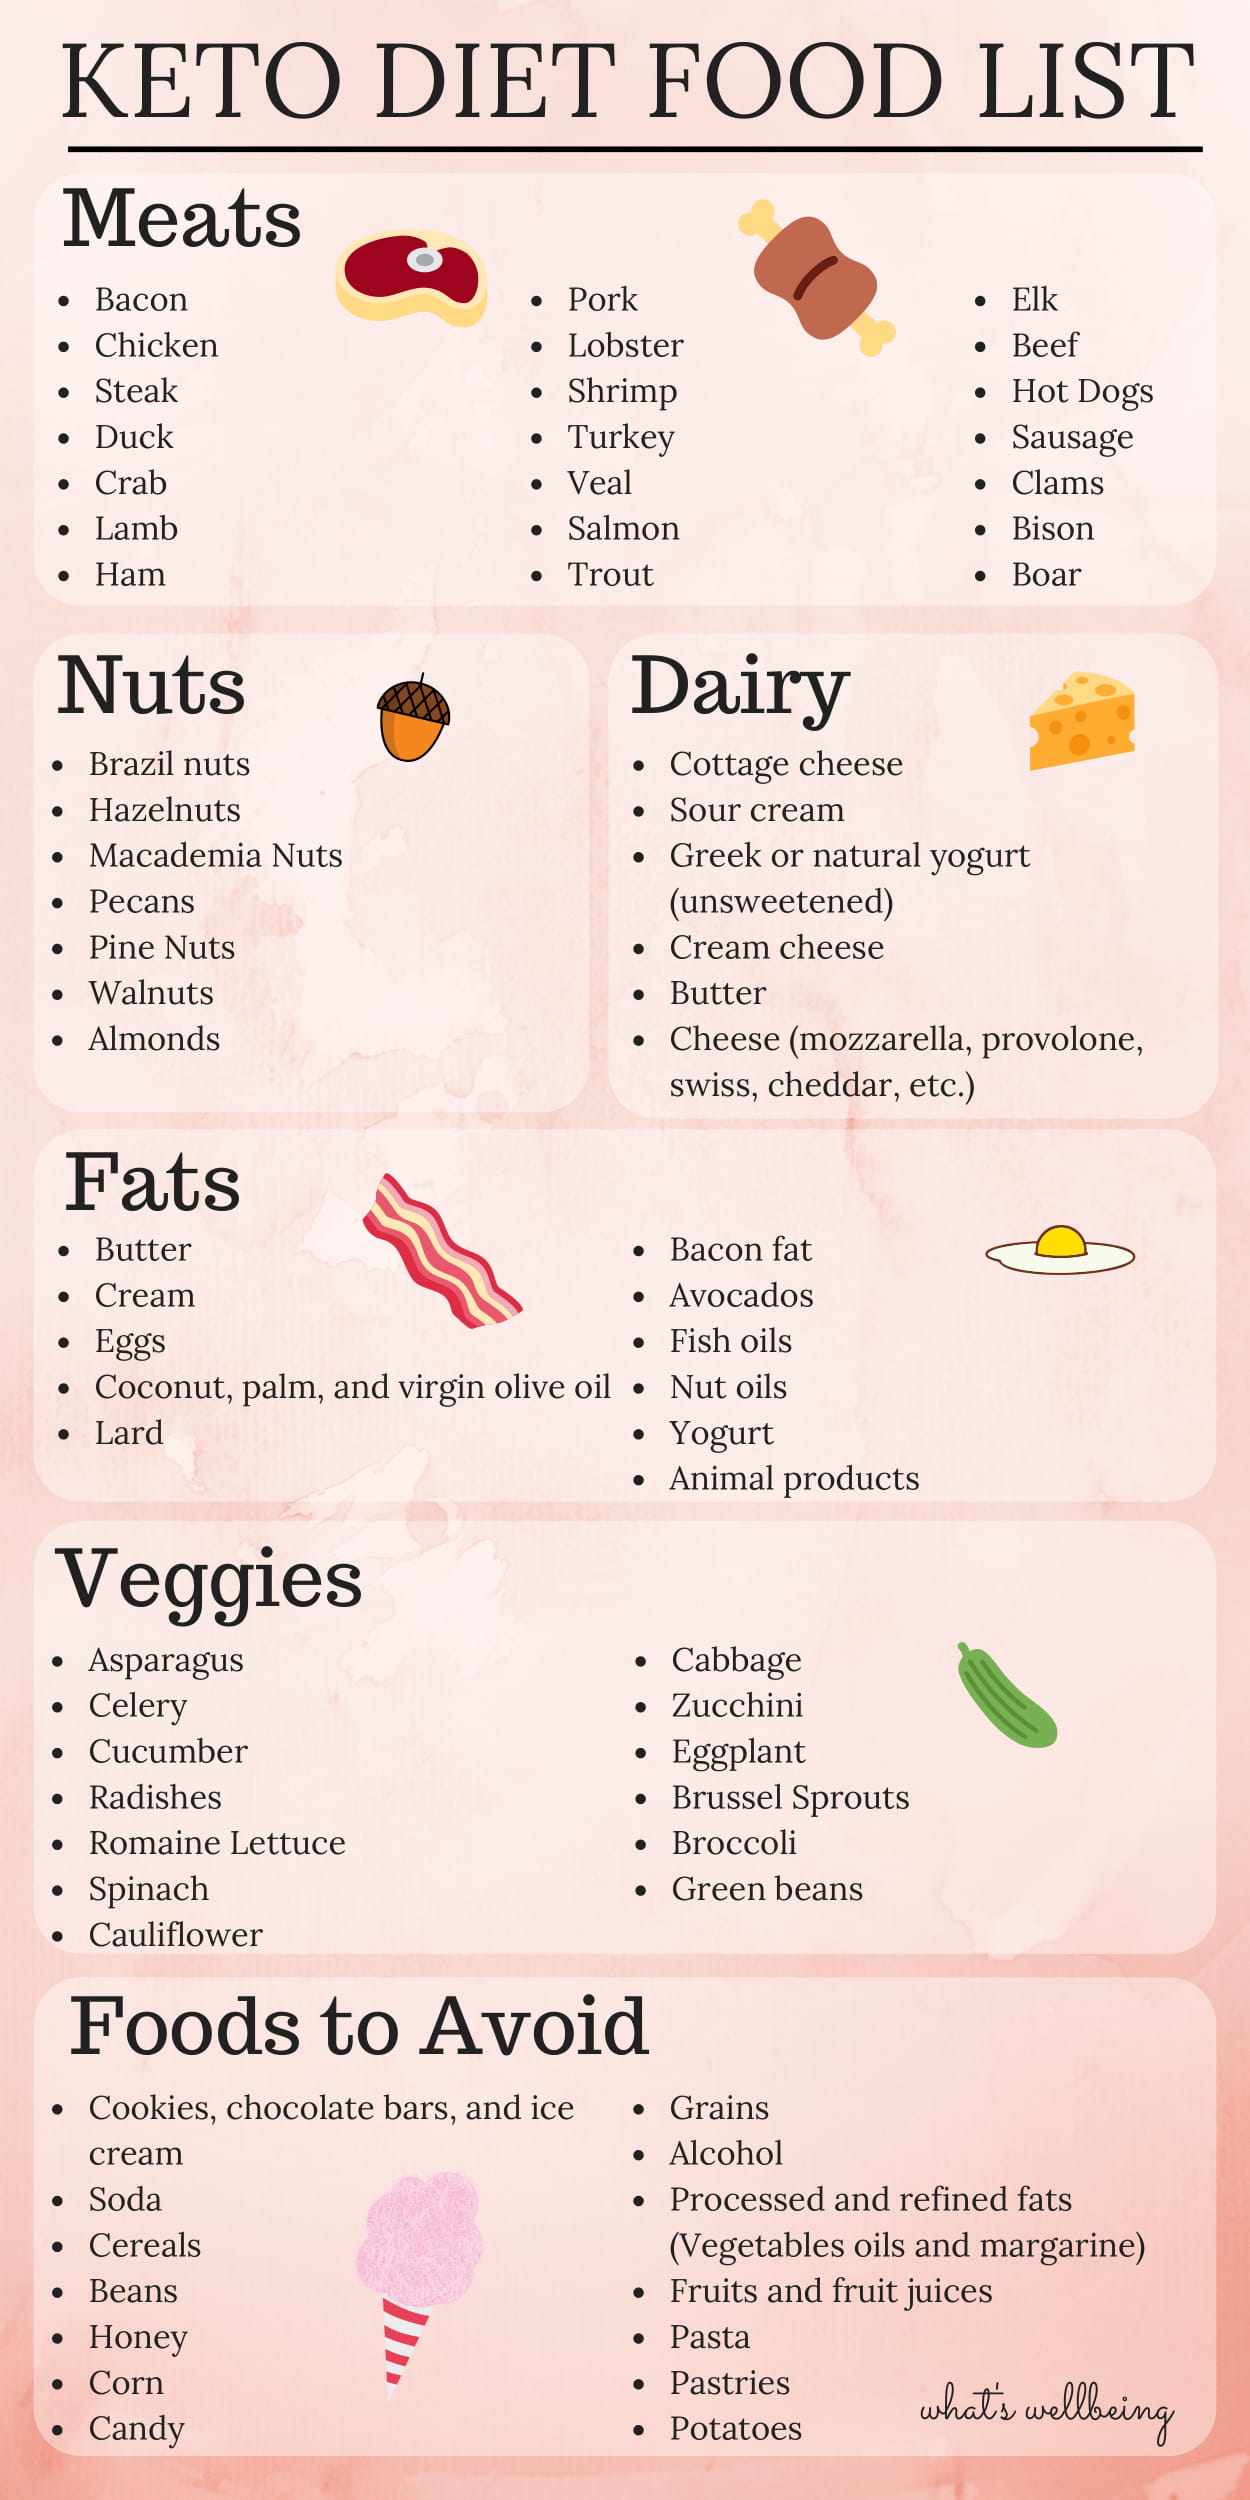 Ketogenic Diet: 9 Keto Charts to Help Keep You on Track Heall